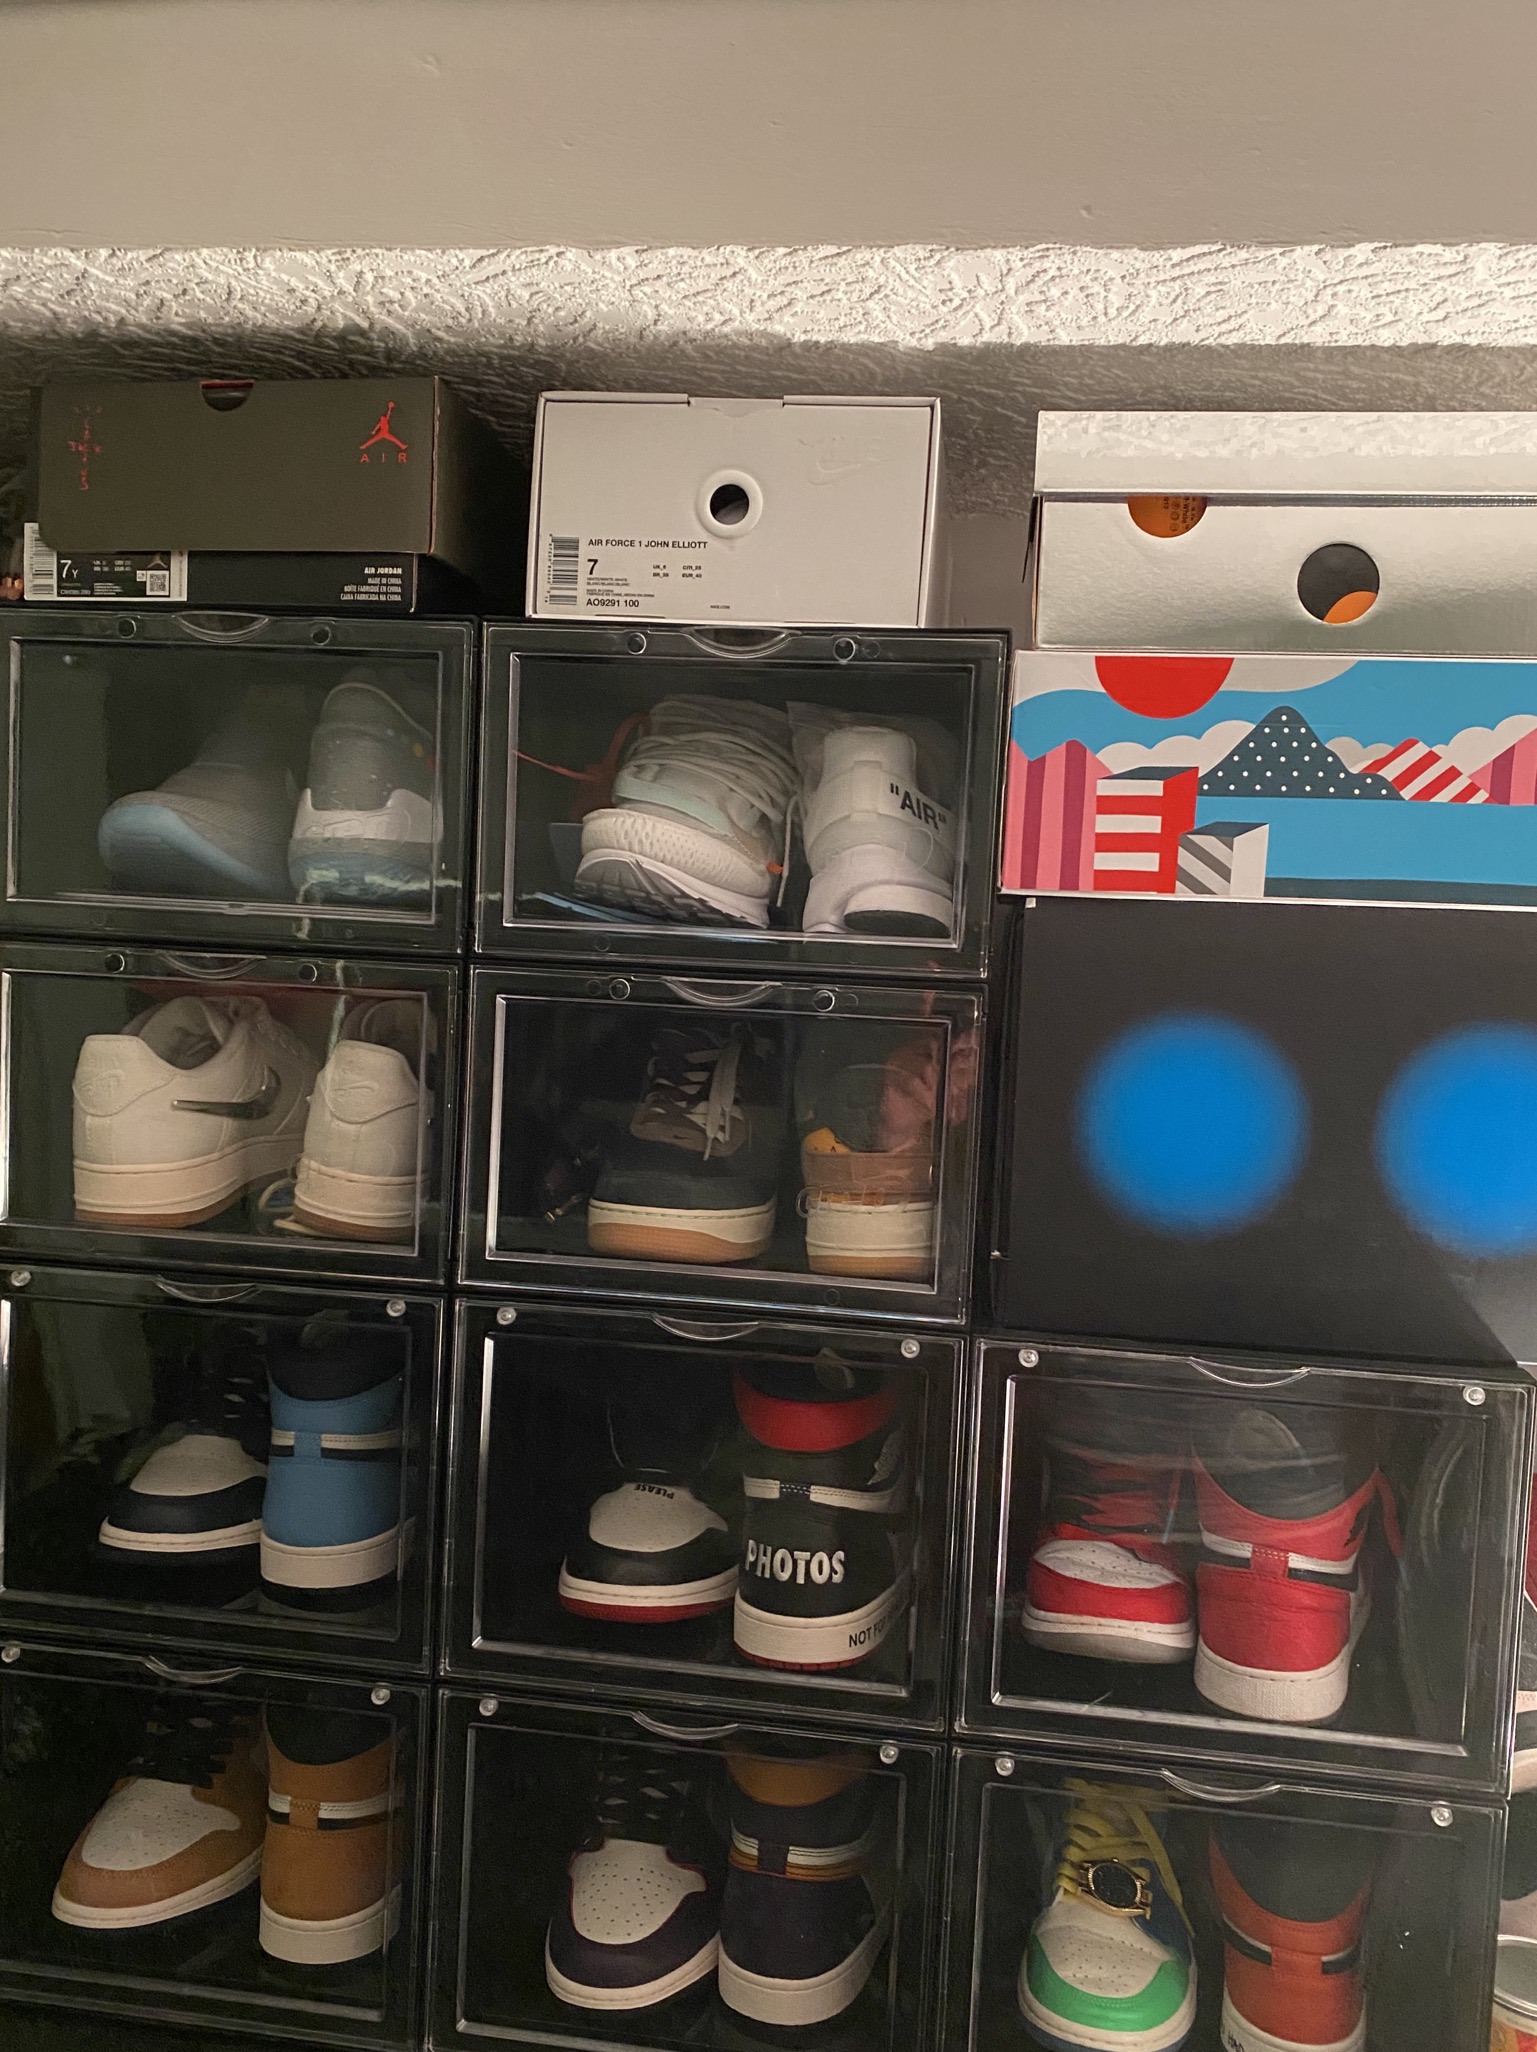 Anyone into trainers/sneakers? (Vol. 2) - Page 355 - The Lounge - PistonHeads